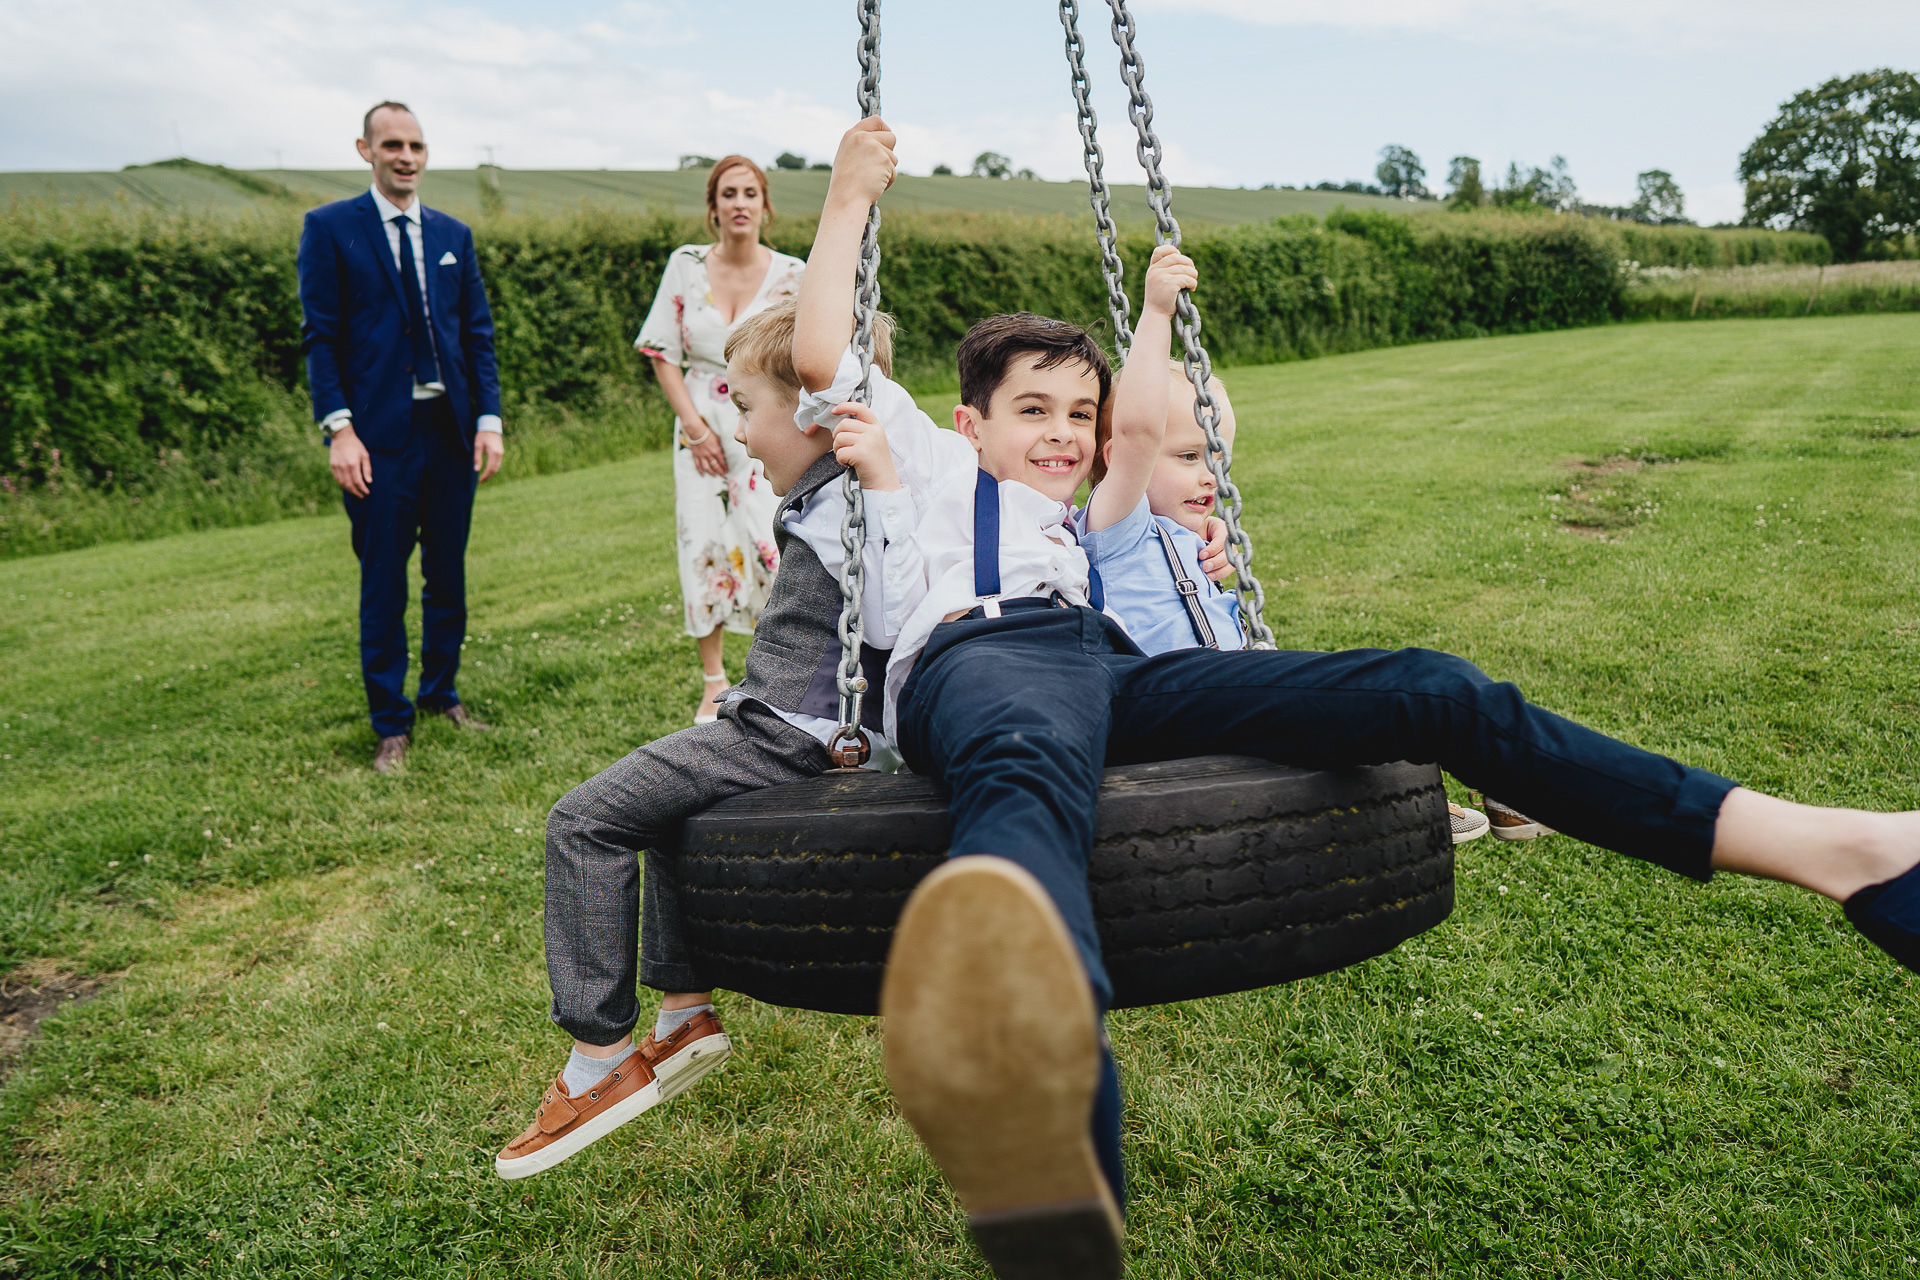 Children on a tyre swing together